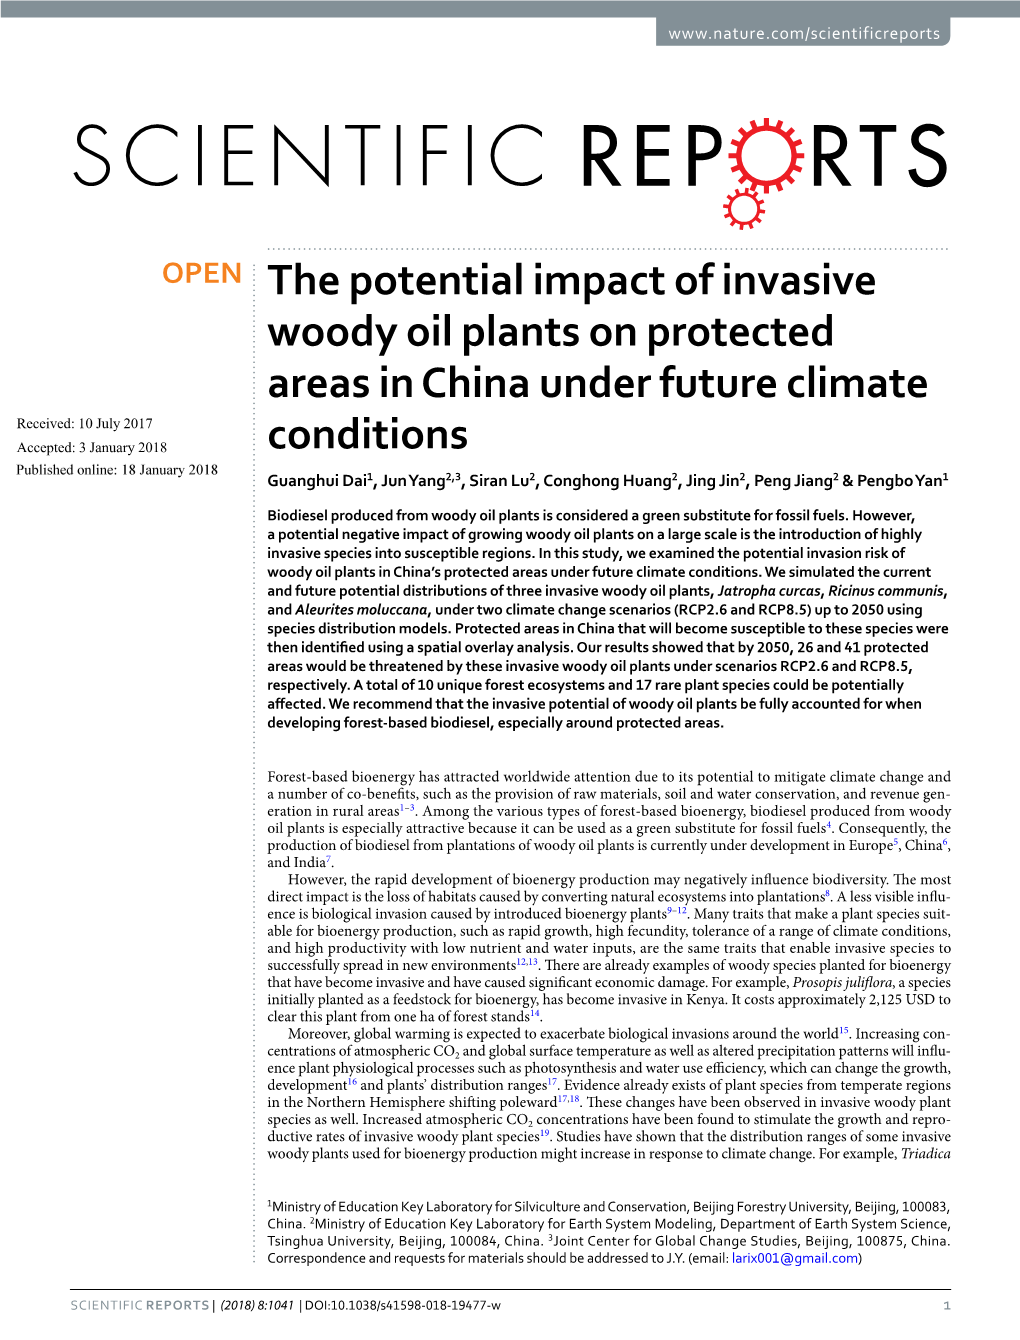 The Potential Impact of Invasive Woody Oil Plants on Protected Areas